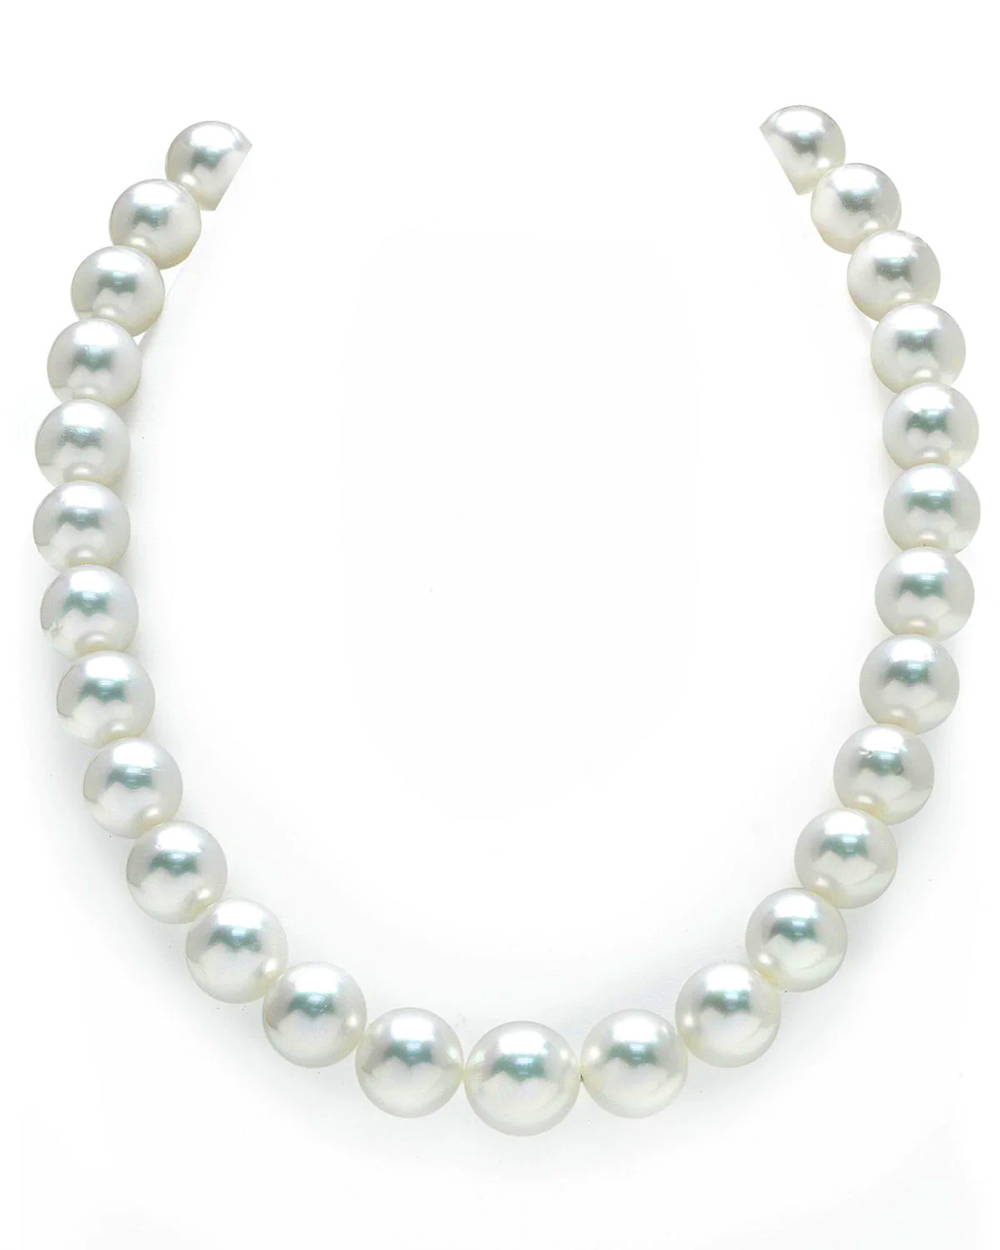 Gem Quality White South Sea Pearl Necklace